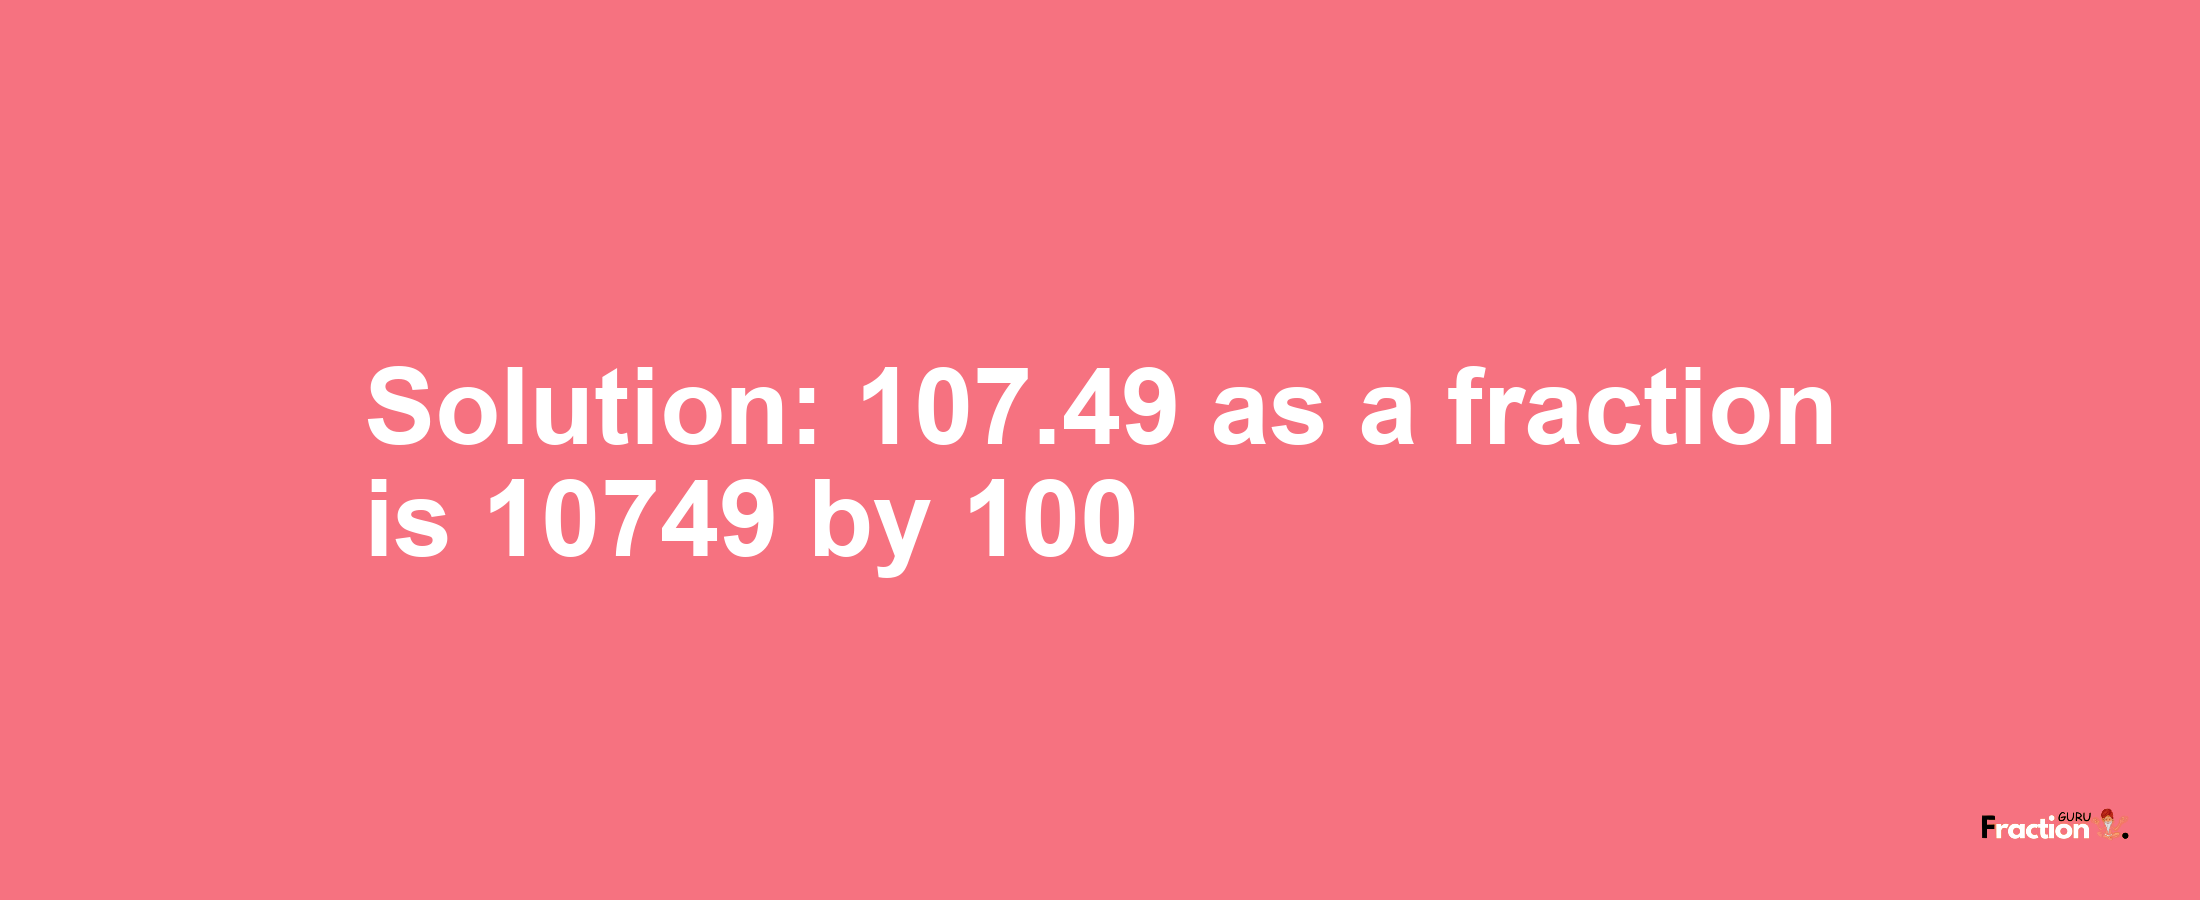 Solution:107.49 as a fraction is 10749/100